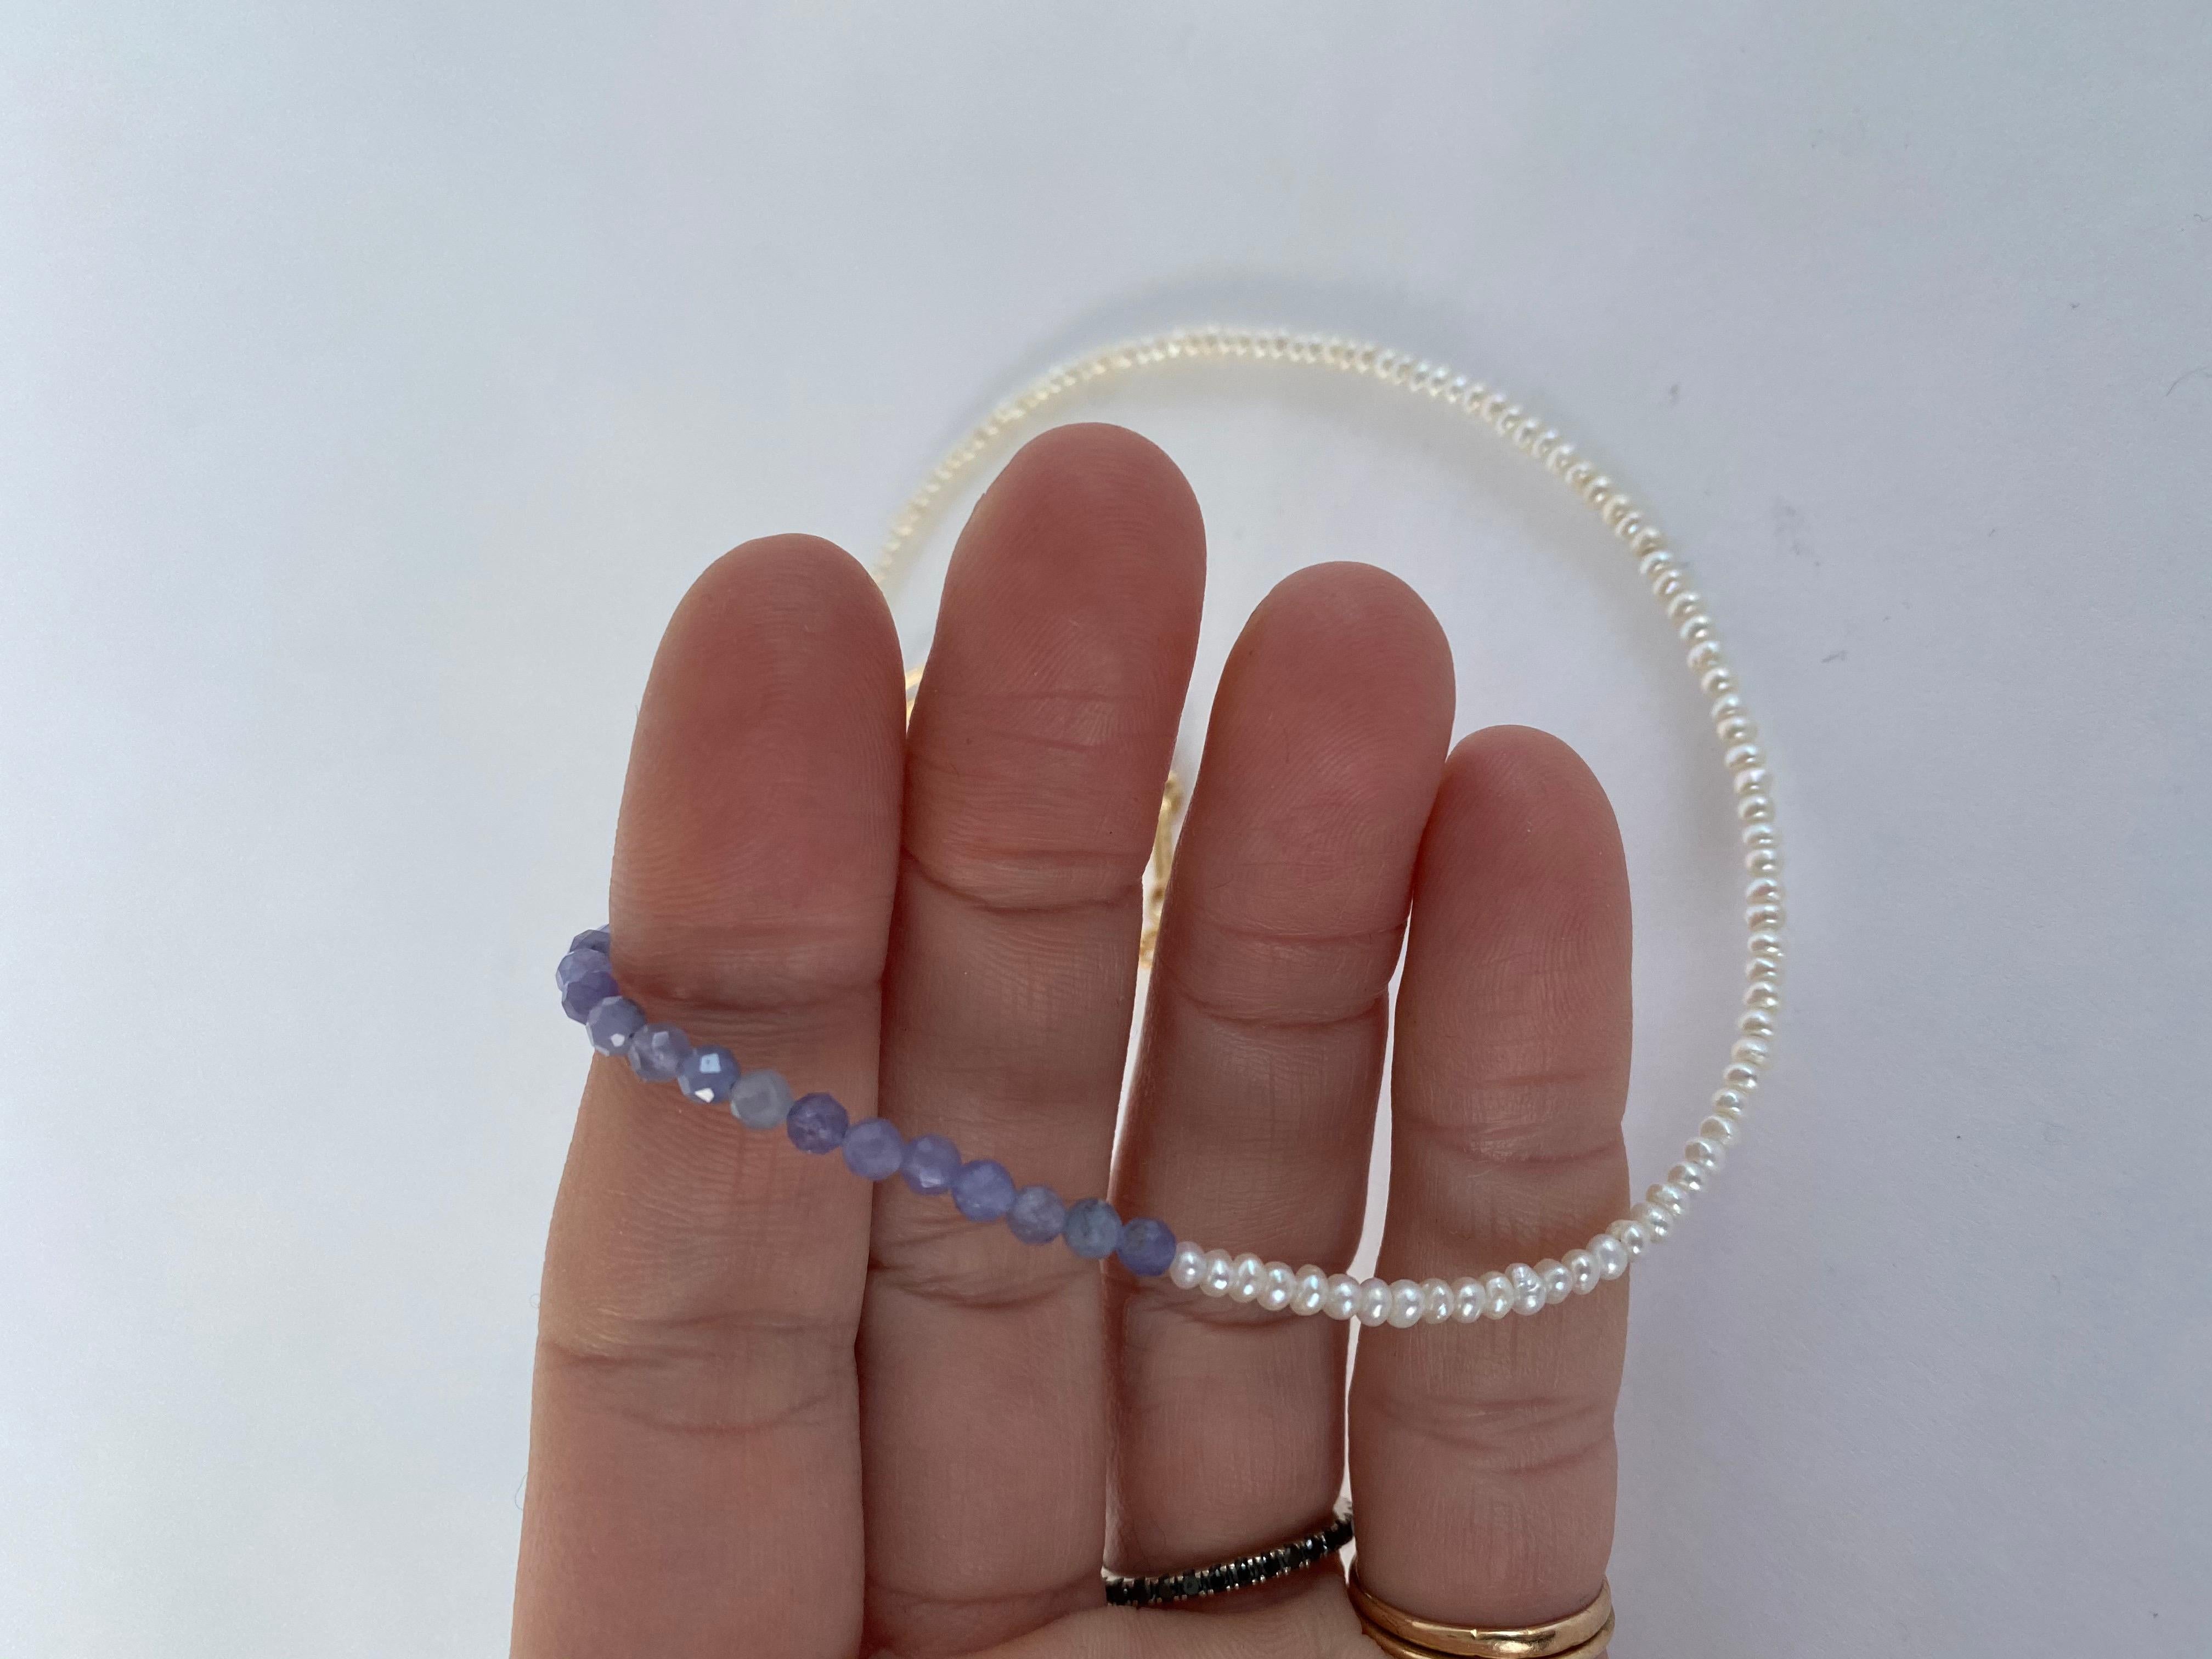 Tanzanite White Pearl Gold Filled Chain Beaded Ankle Bracelet J Dauphin
can also be used as a bracelet as chain is adjustable

